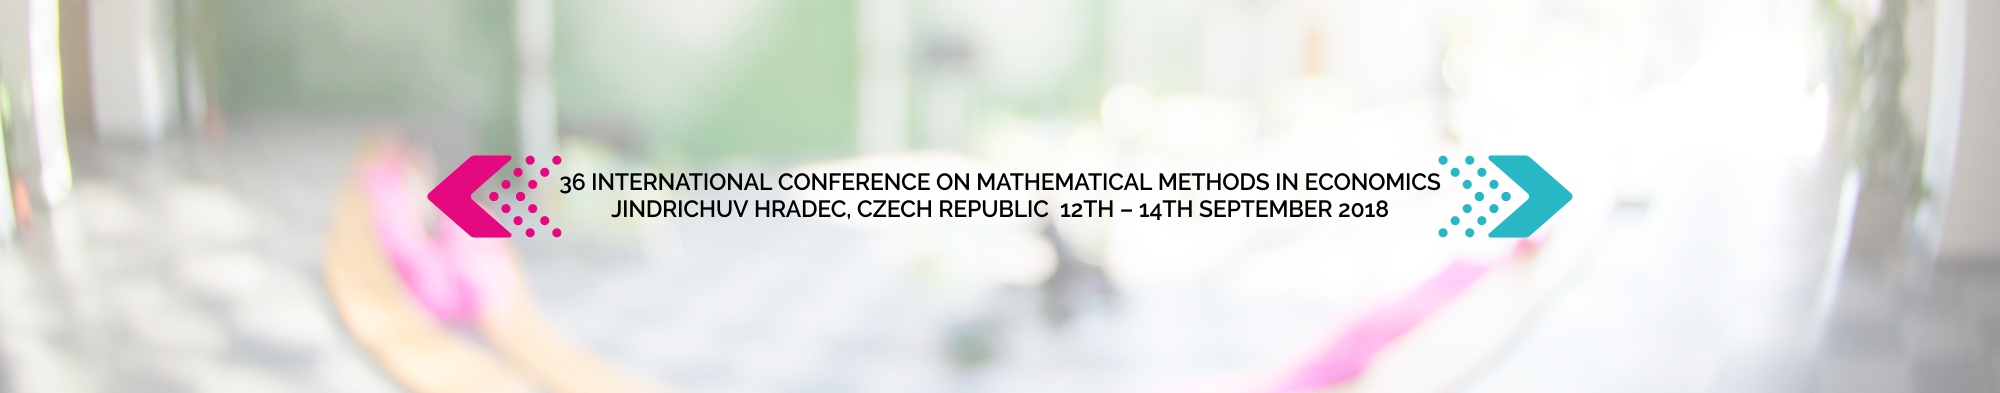 36 International Conference on Mathematical Methods in Economics Jindrichuv Hradec, Czech Republic 11th – 14th September 2018